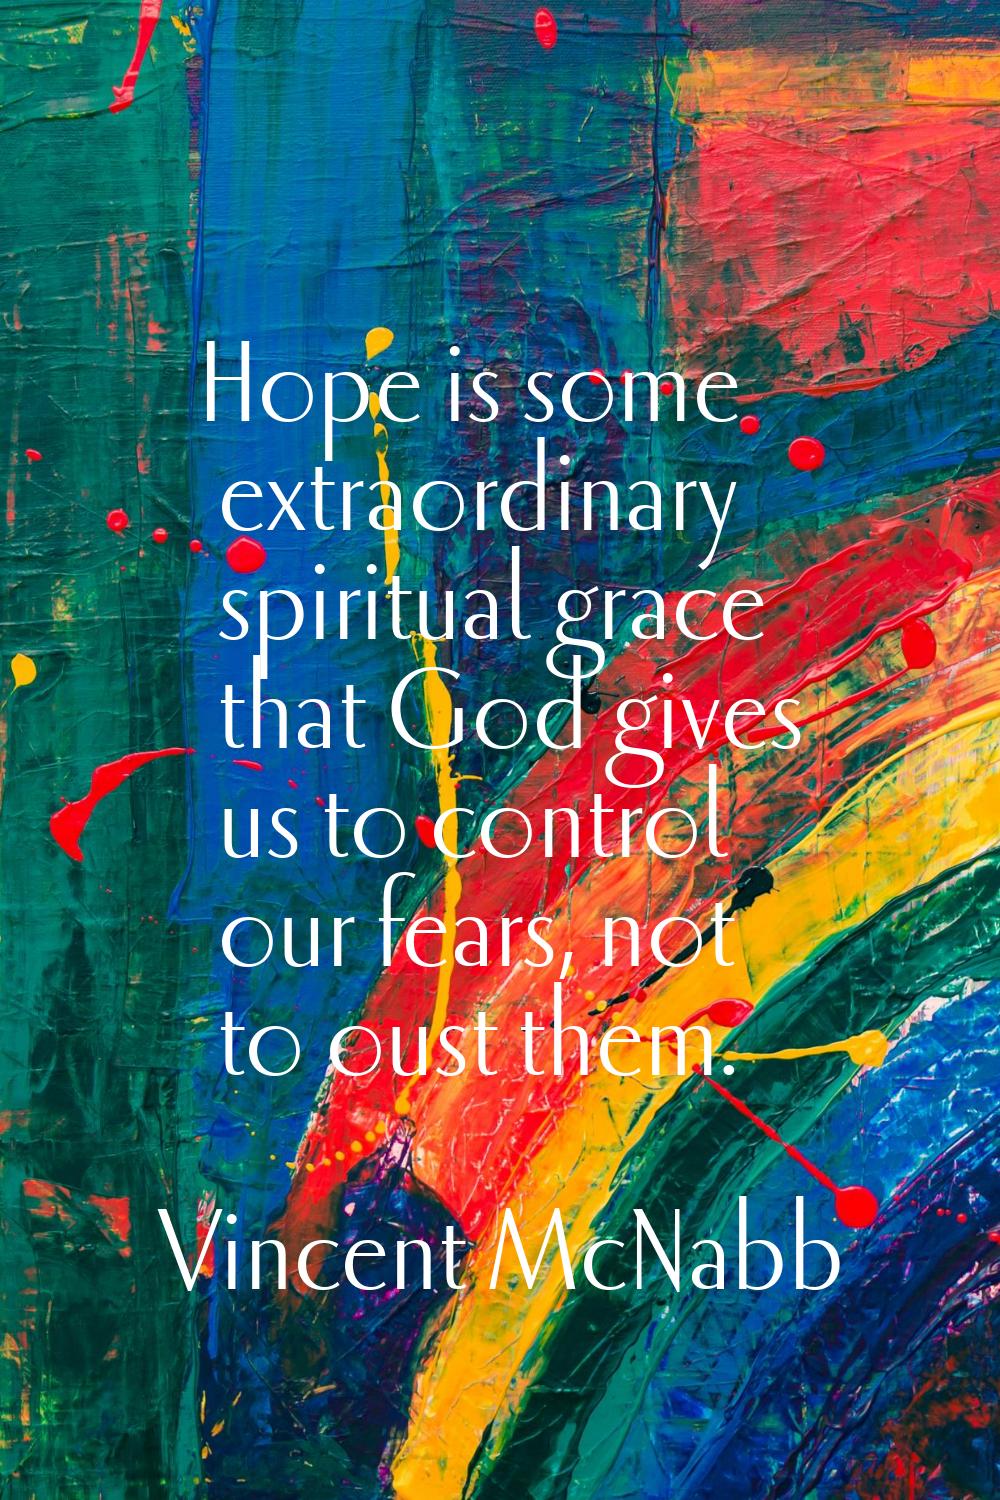 Hope is some extraordinary spiritual grace that God gives us to control our fears, not to oust them